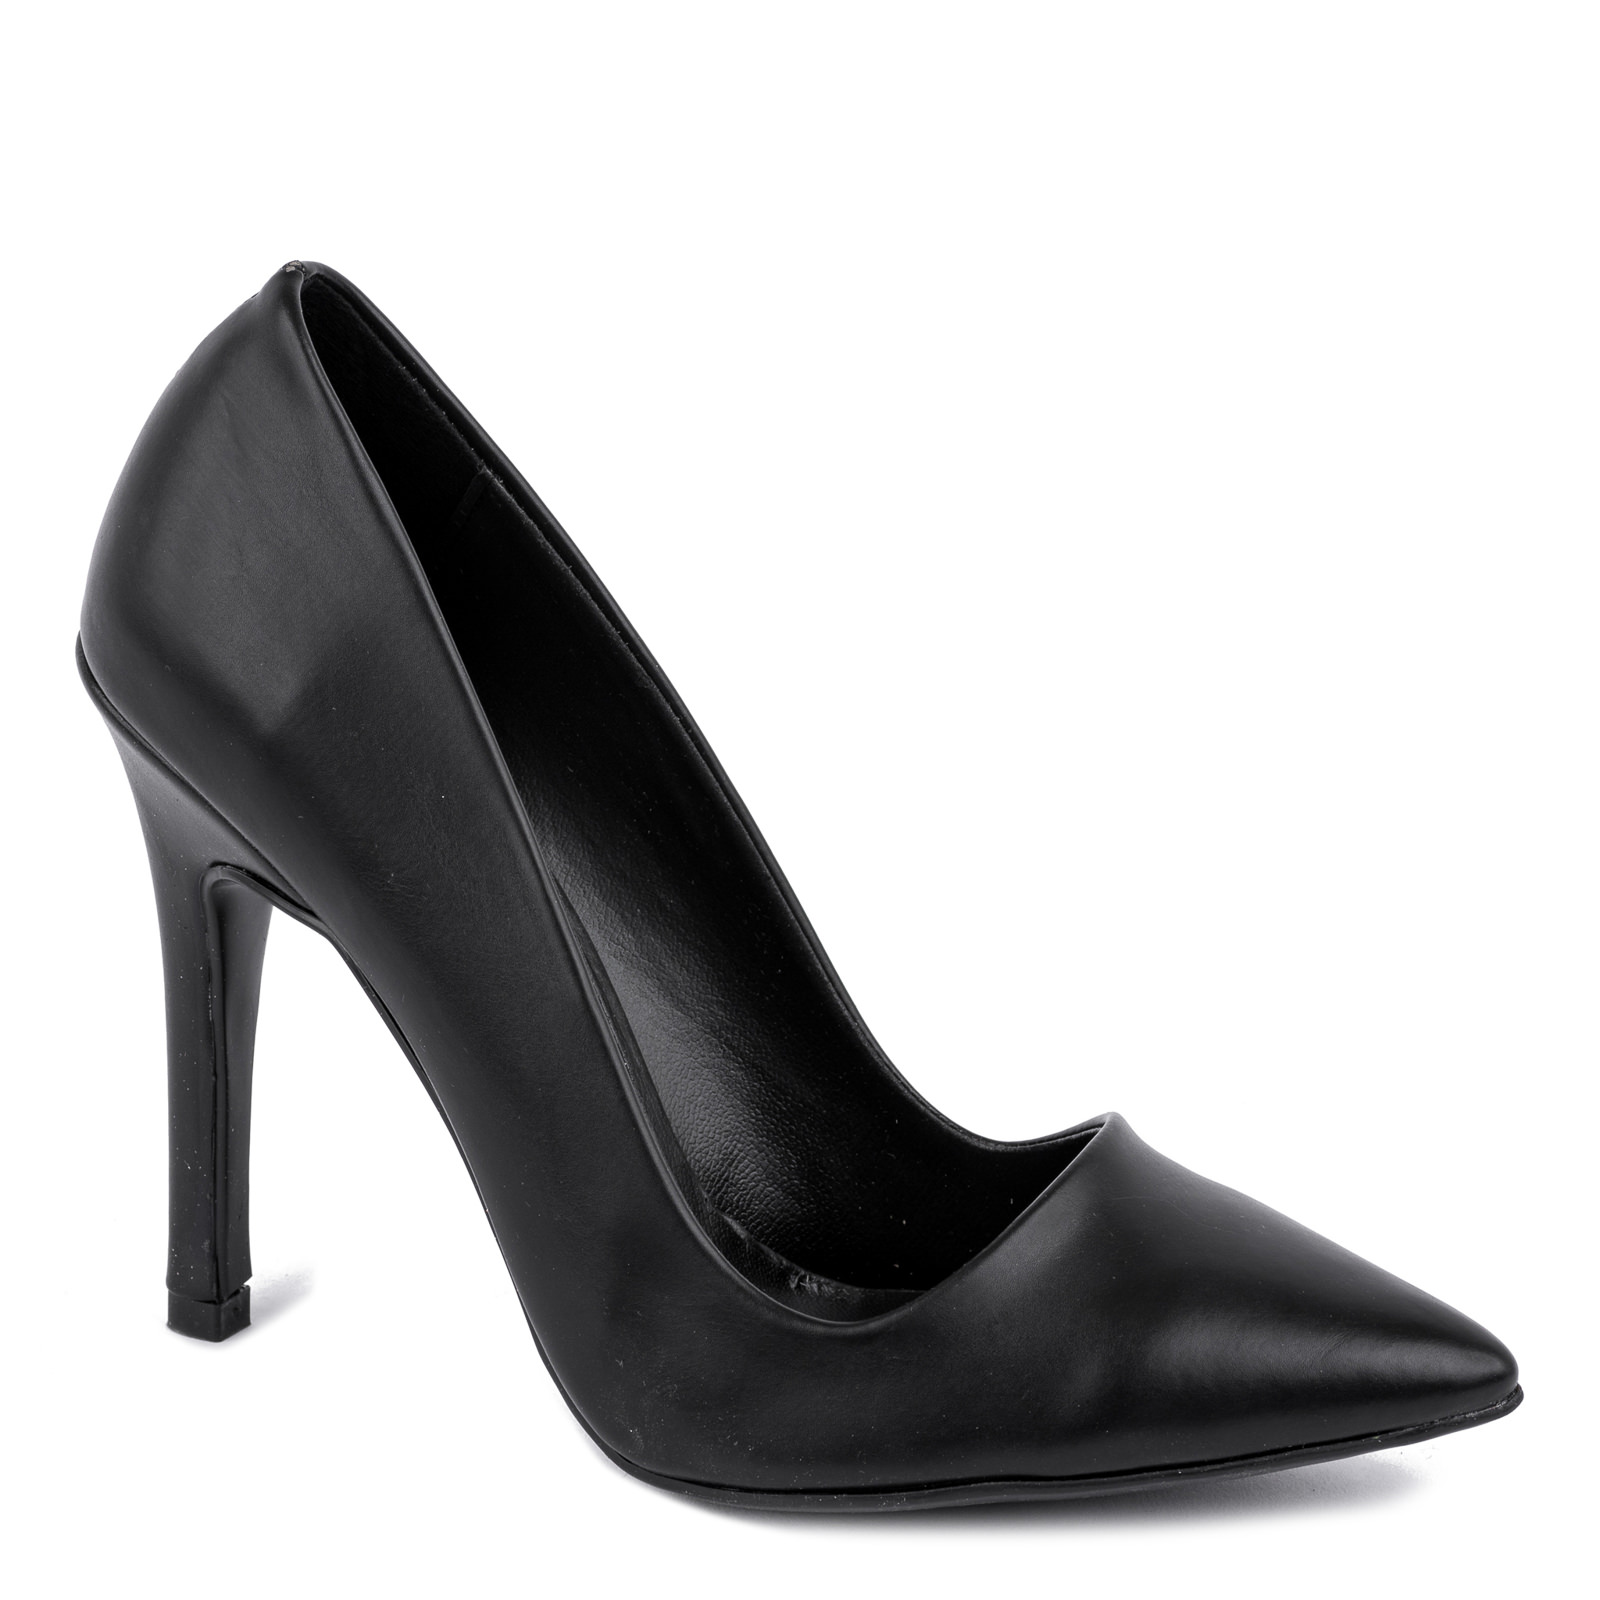 POINTED STILETTO SHOES WITH THIN HEEL - BLACK